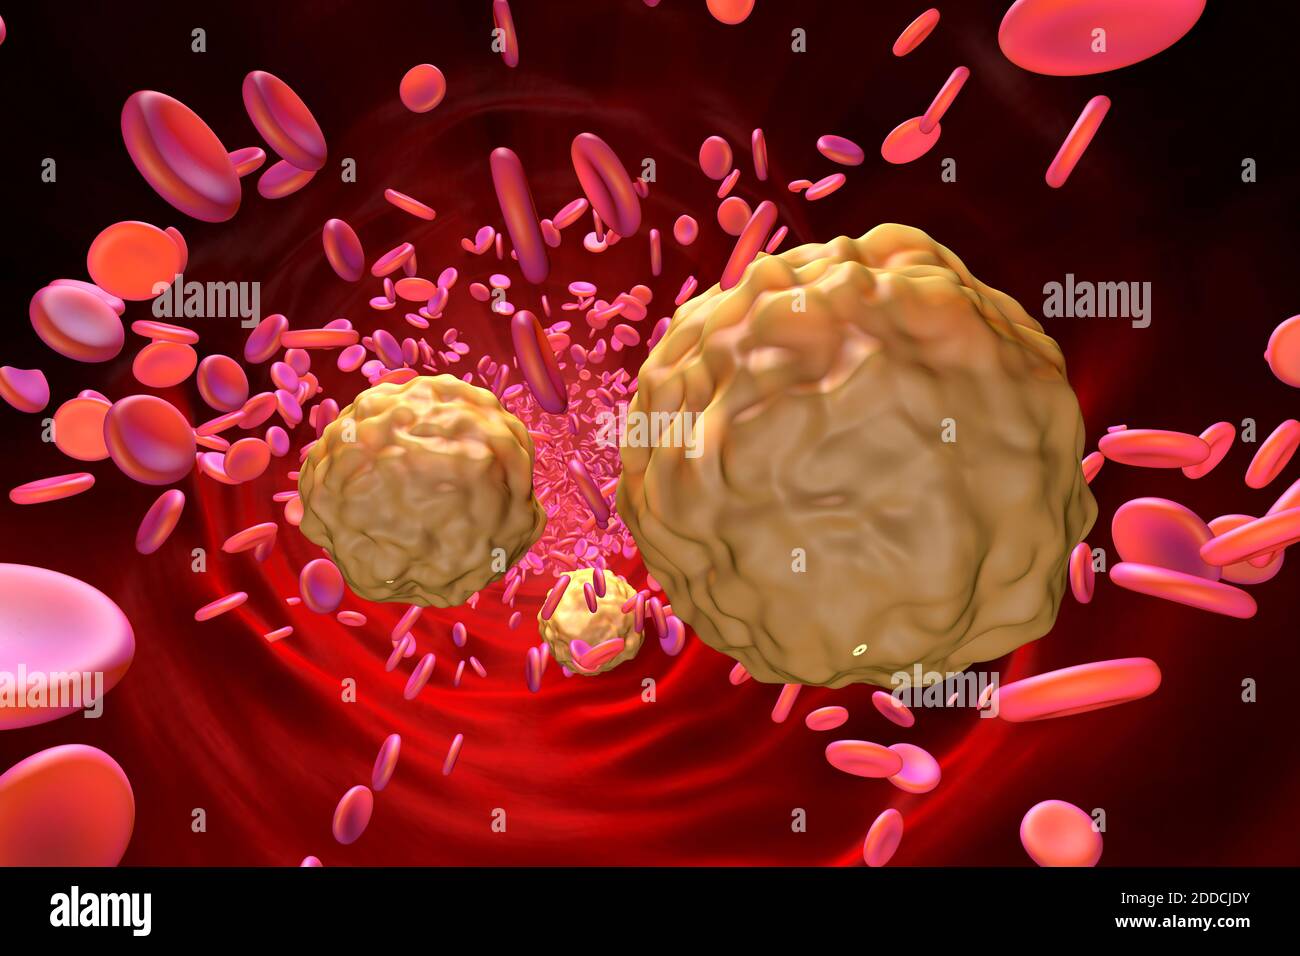 3D illustration of lymphocyte and blood cells Stock Photo